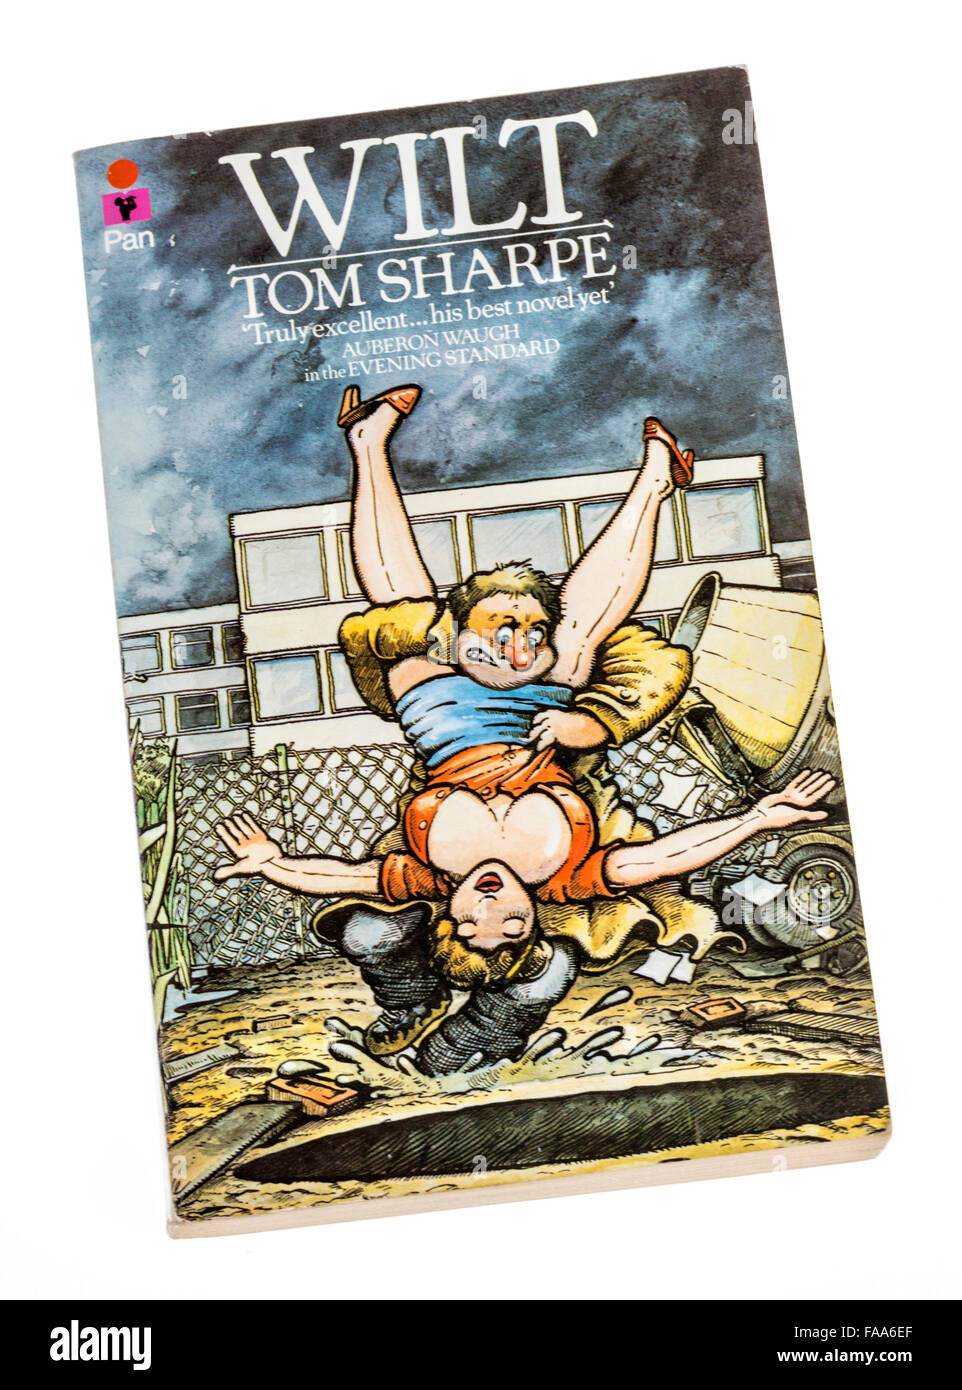 Wilt by Tom Sharpe book cover published by Pan Stock Photo - Alamy